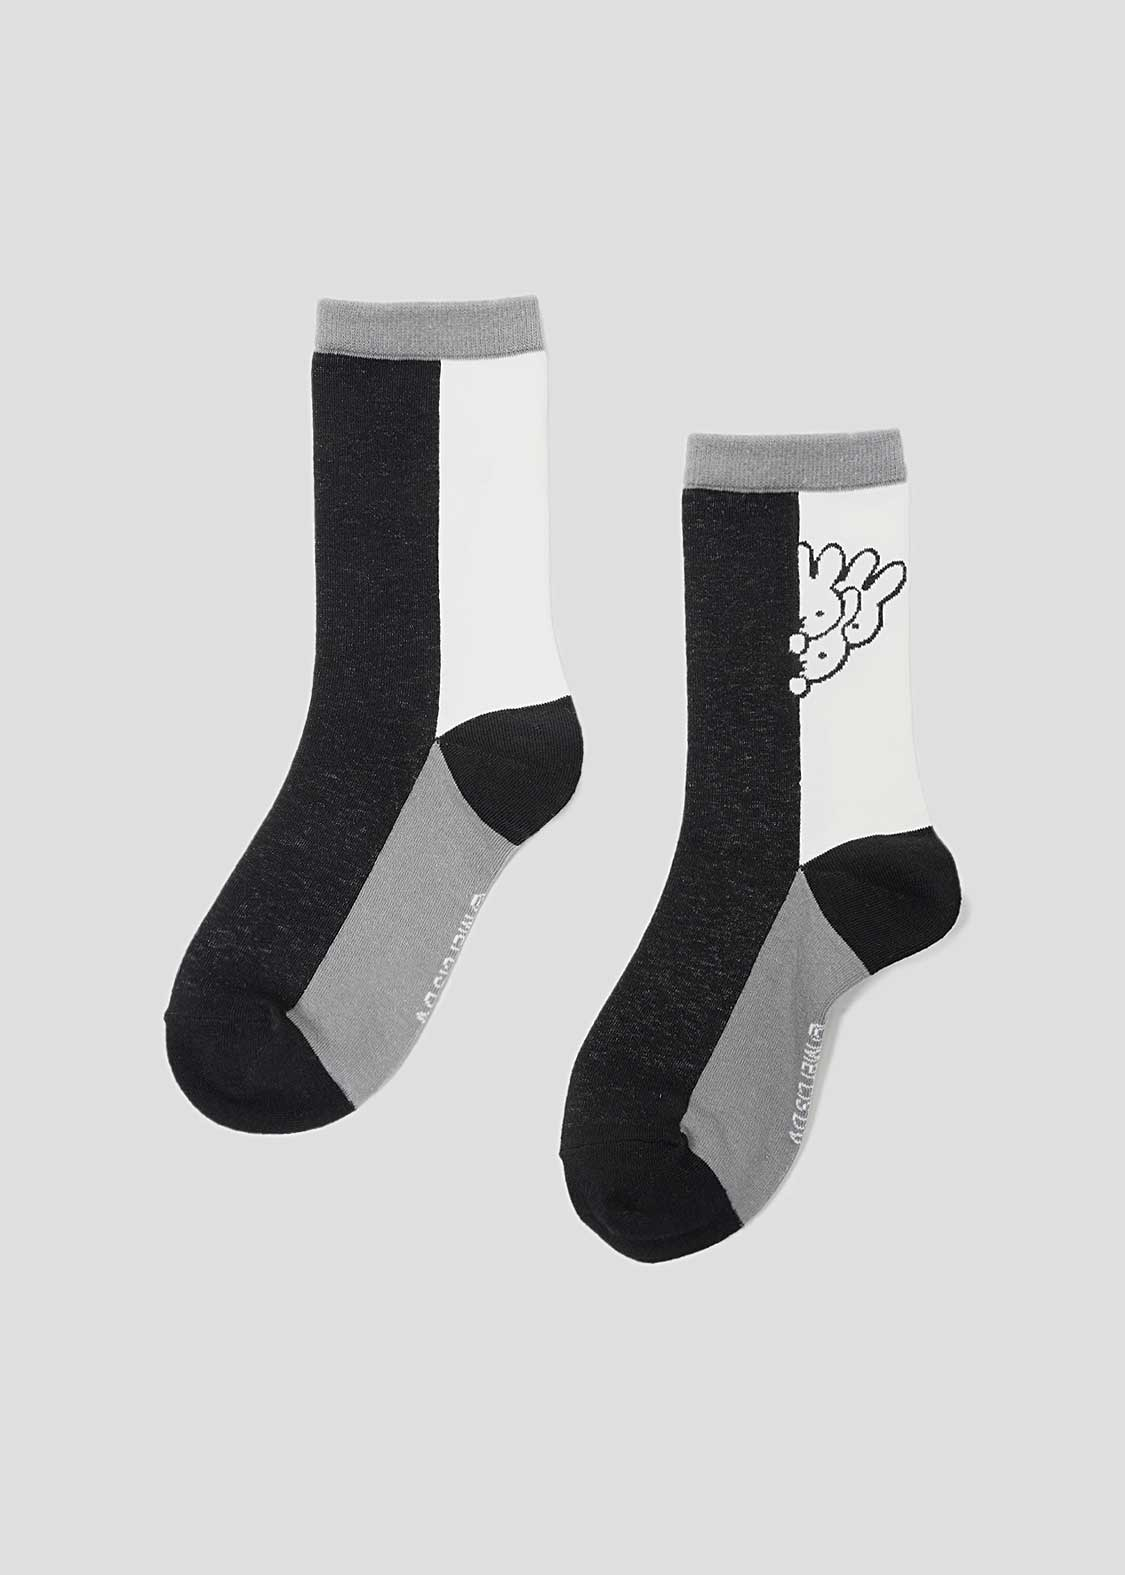 miffy Middle Socks (miffy_miffy Hide and Seek)